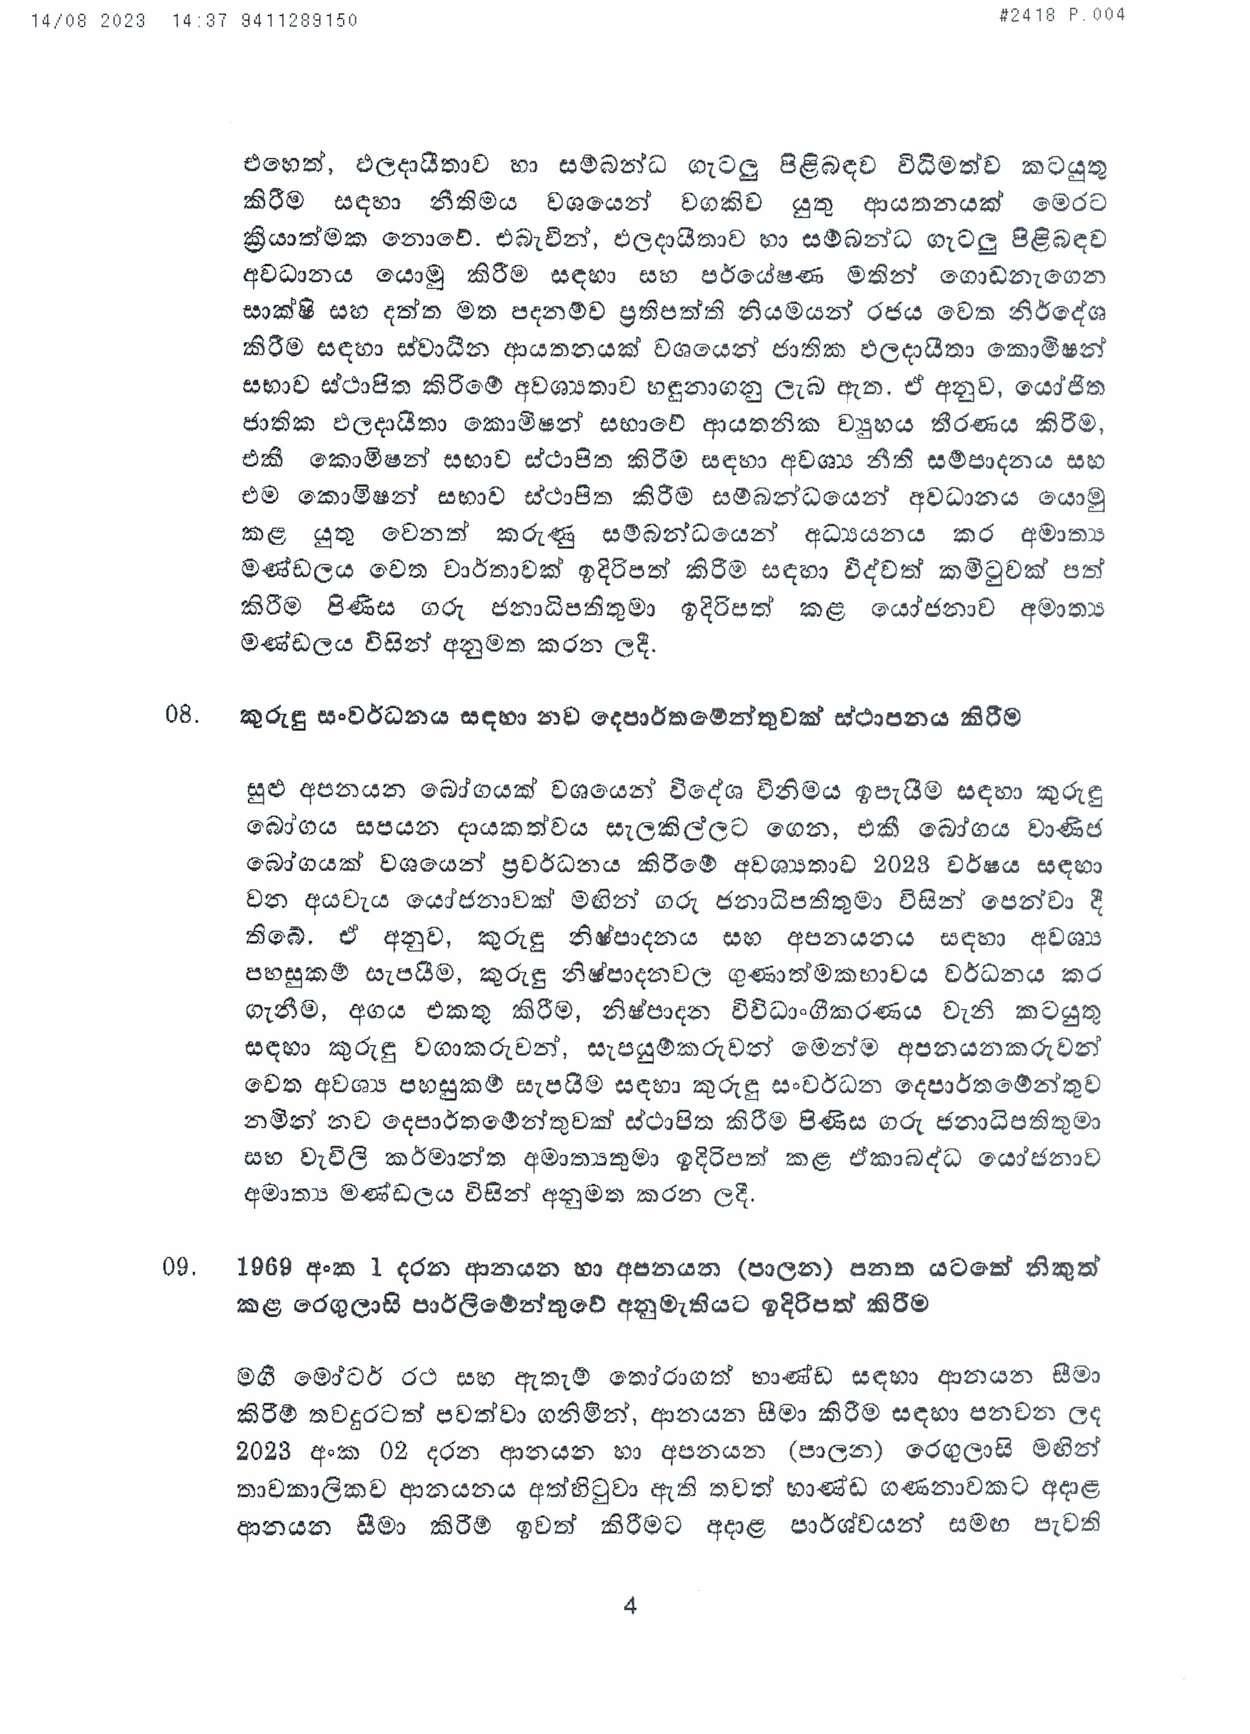 Cabinet Decision on 14.08.2023 1 page 004